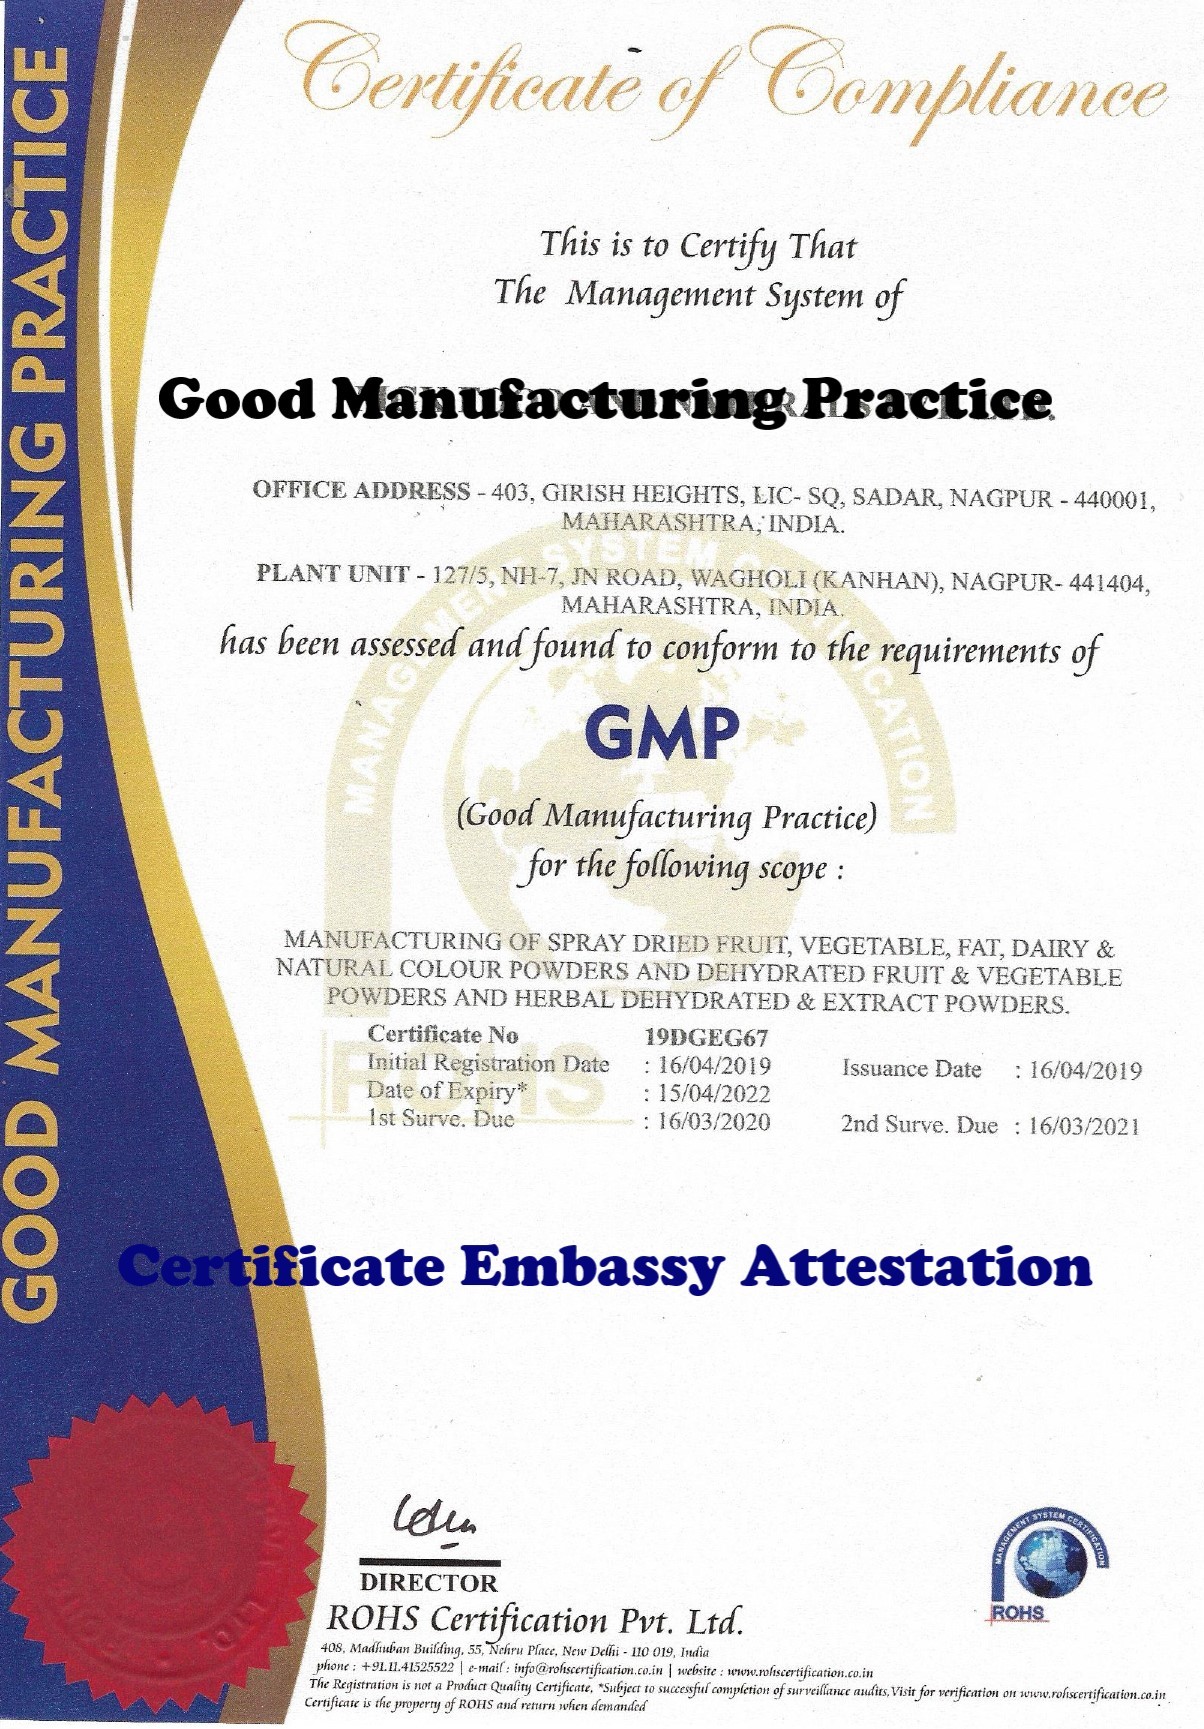 GMP Certificate Attestation from Jamaica Embassy